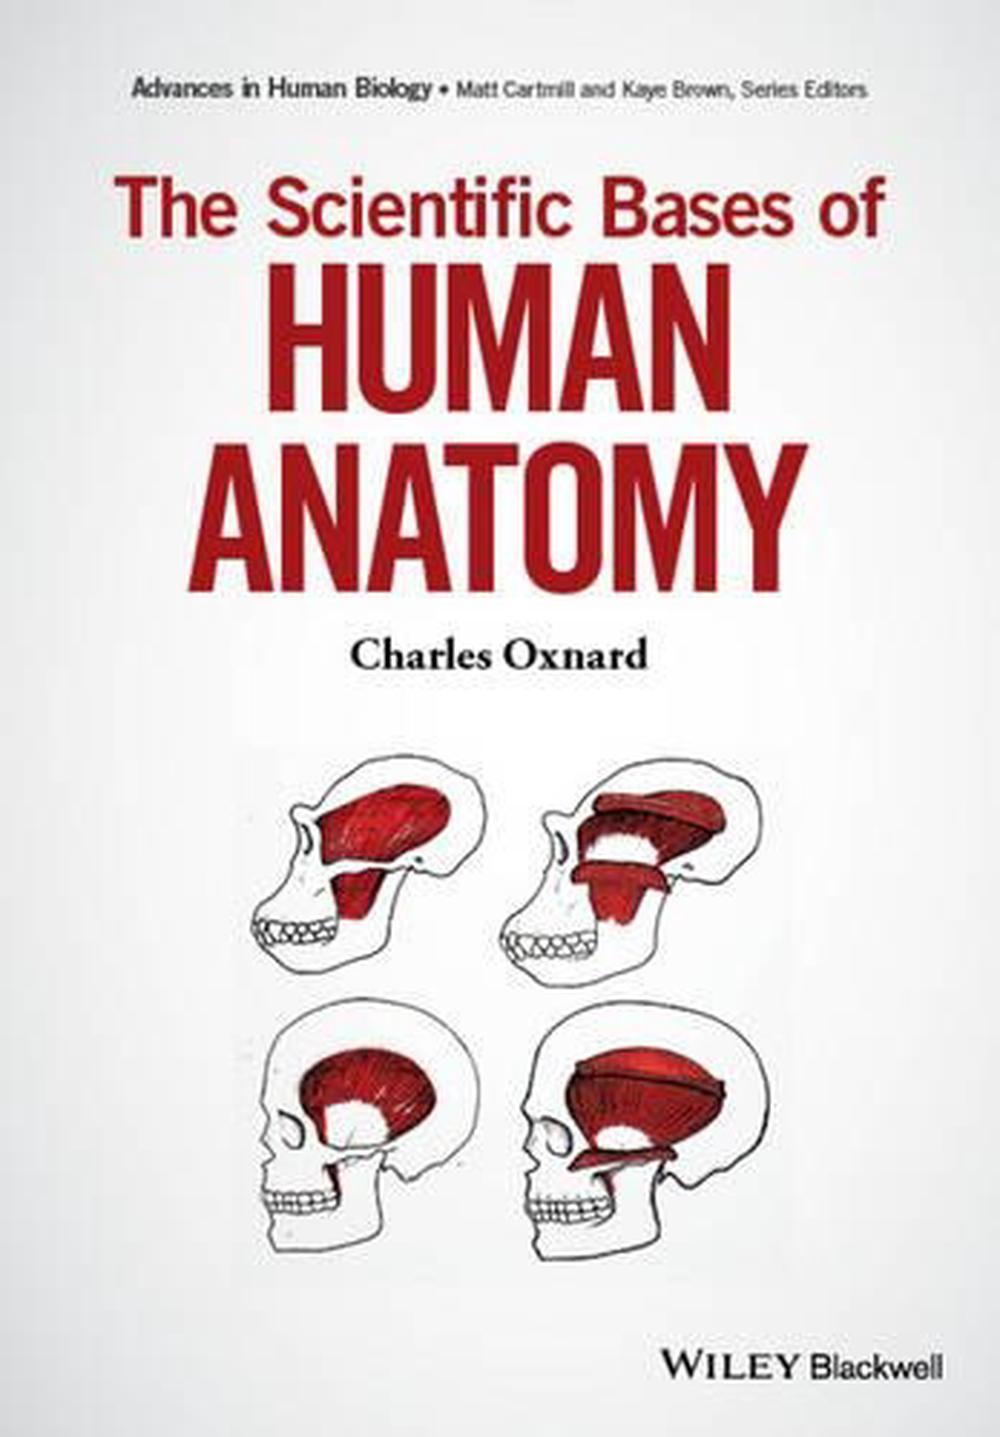 The　Charles　Buy　Hardcover,　at　Oxnard,　Bases　Scientific　online　Anatomy　9780471235996　Human　by　of　The　Nile